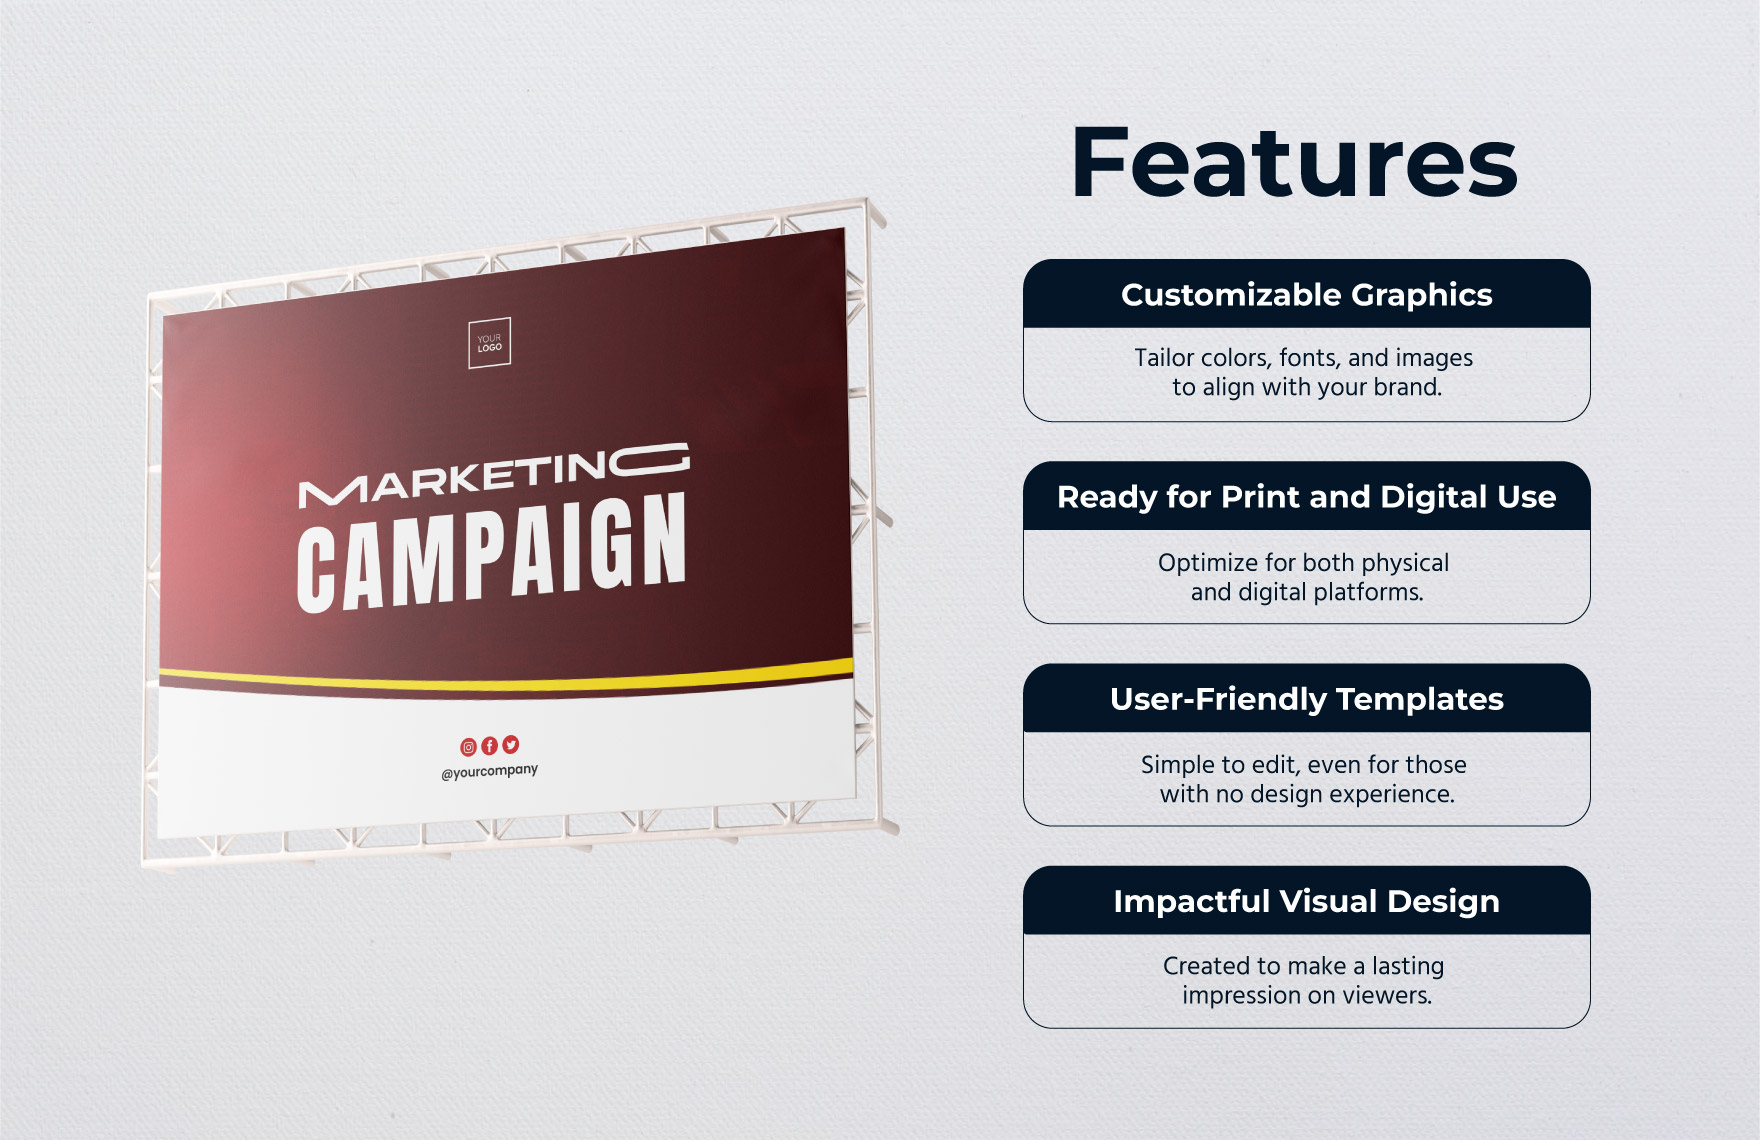 Marketing Campaign Sign Template